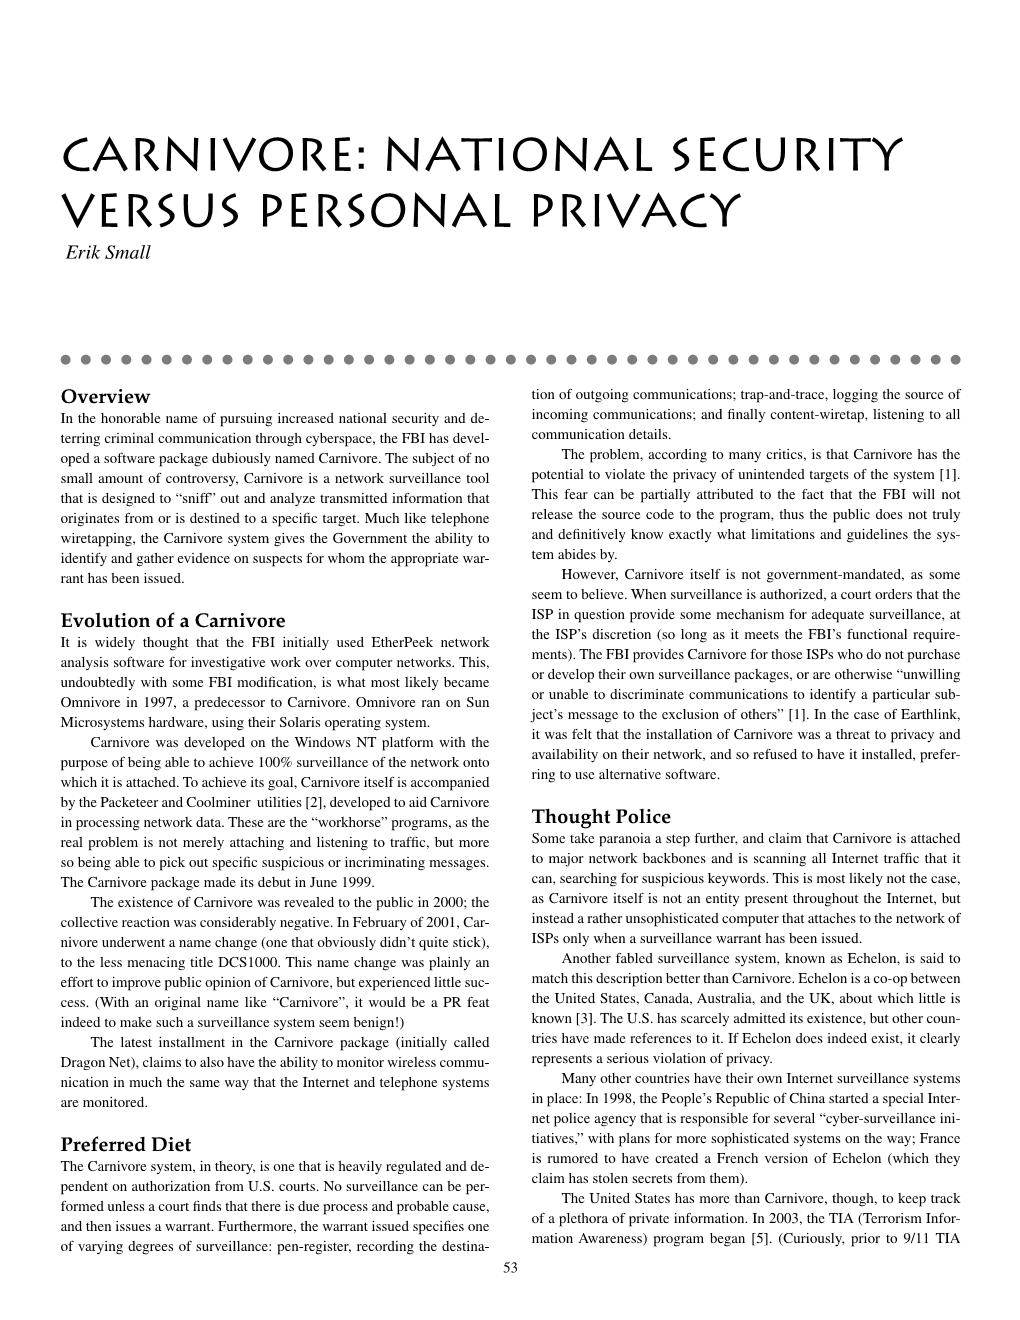 Carnivore: National Security Versus Personal Privacy